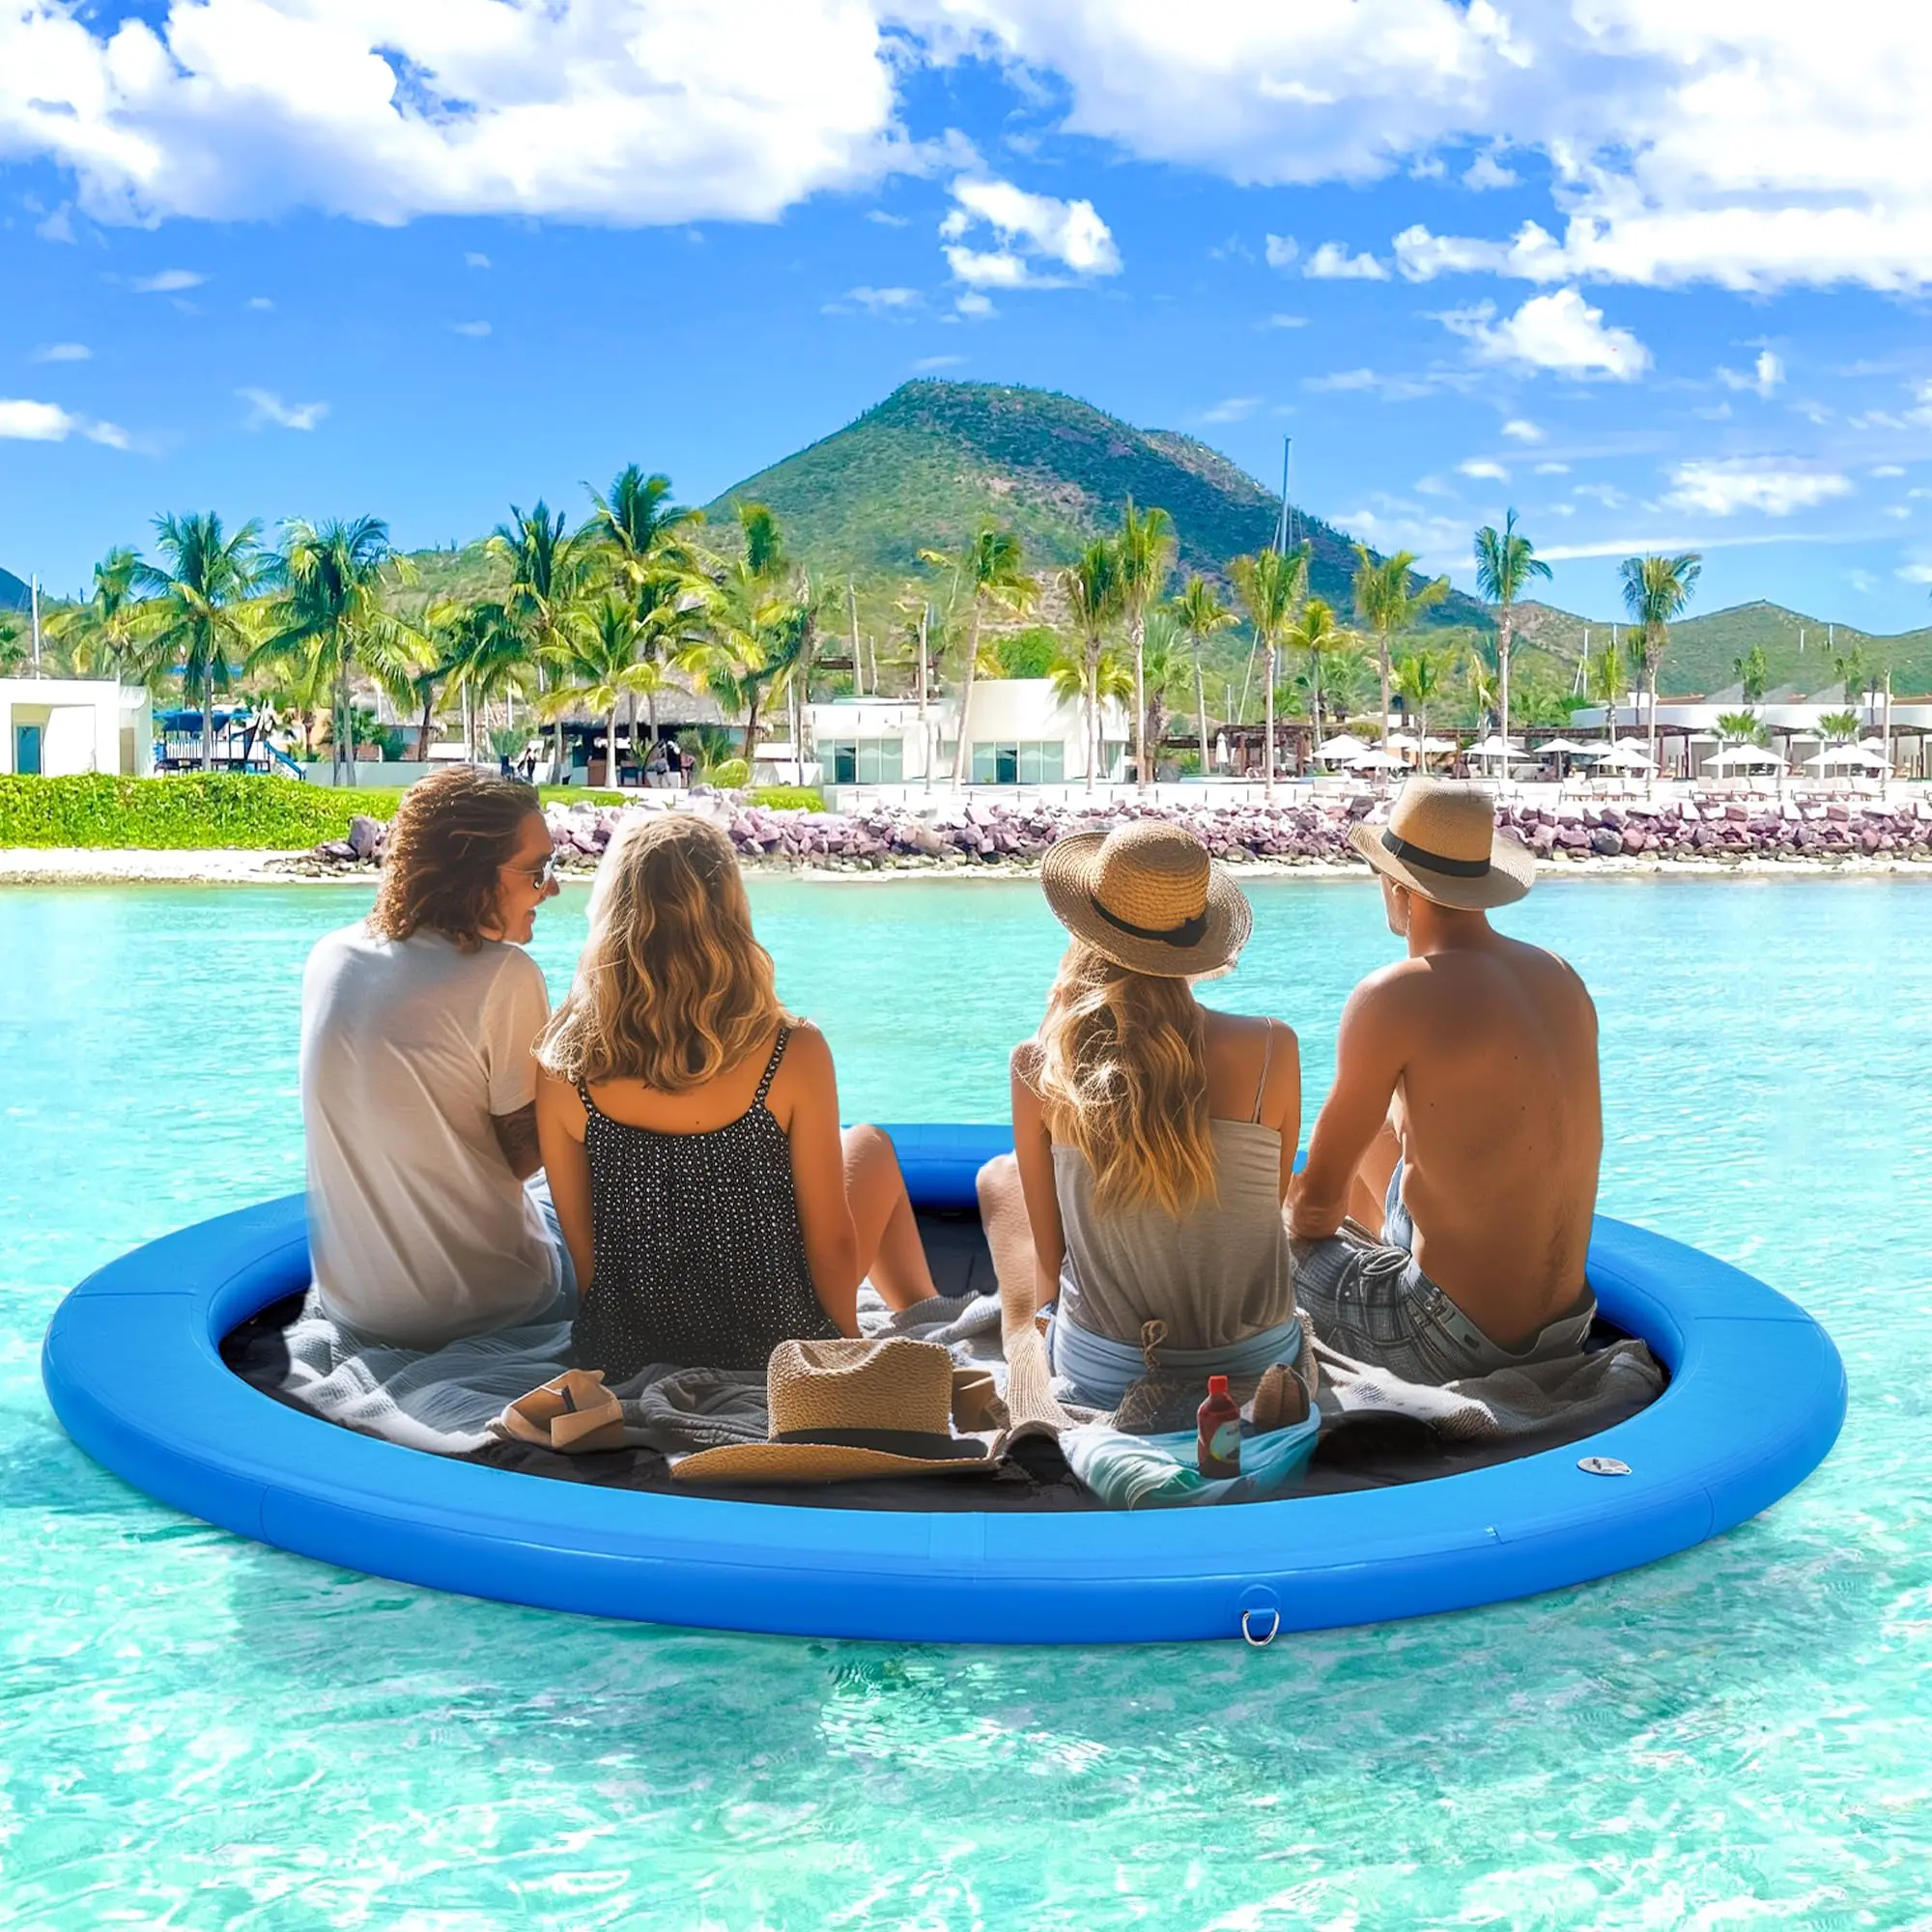 

8'x8' Floating Dock, Inflatable Dock Float Ring with 4-inch High-Grade Woven Fabric, Manual Pump Fits4-6 For Lakes Pools, Ocean